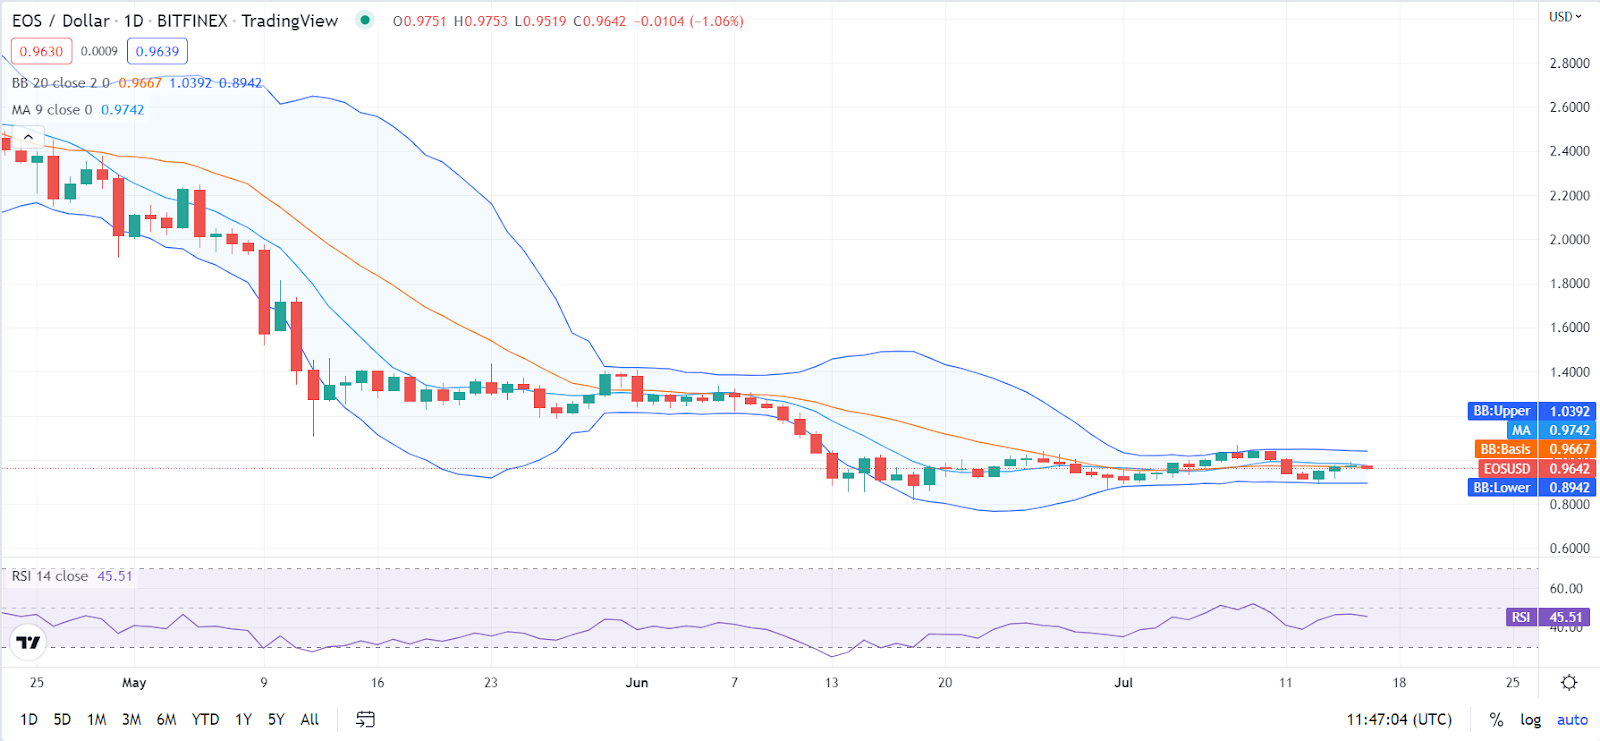 EOS Price Prediction 2022-2031: Is EOS a good investment? 1